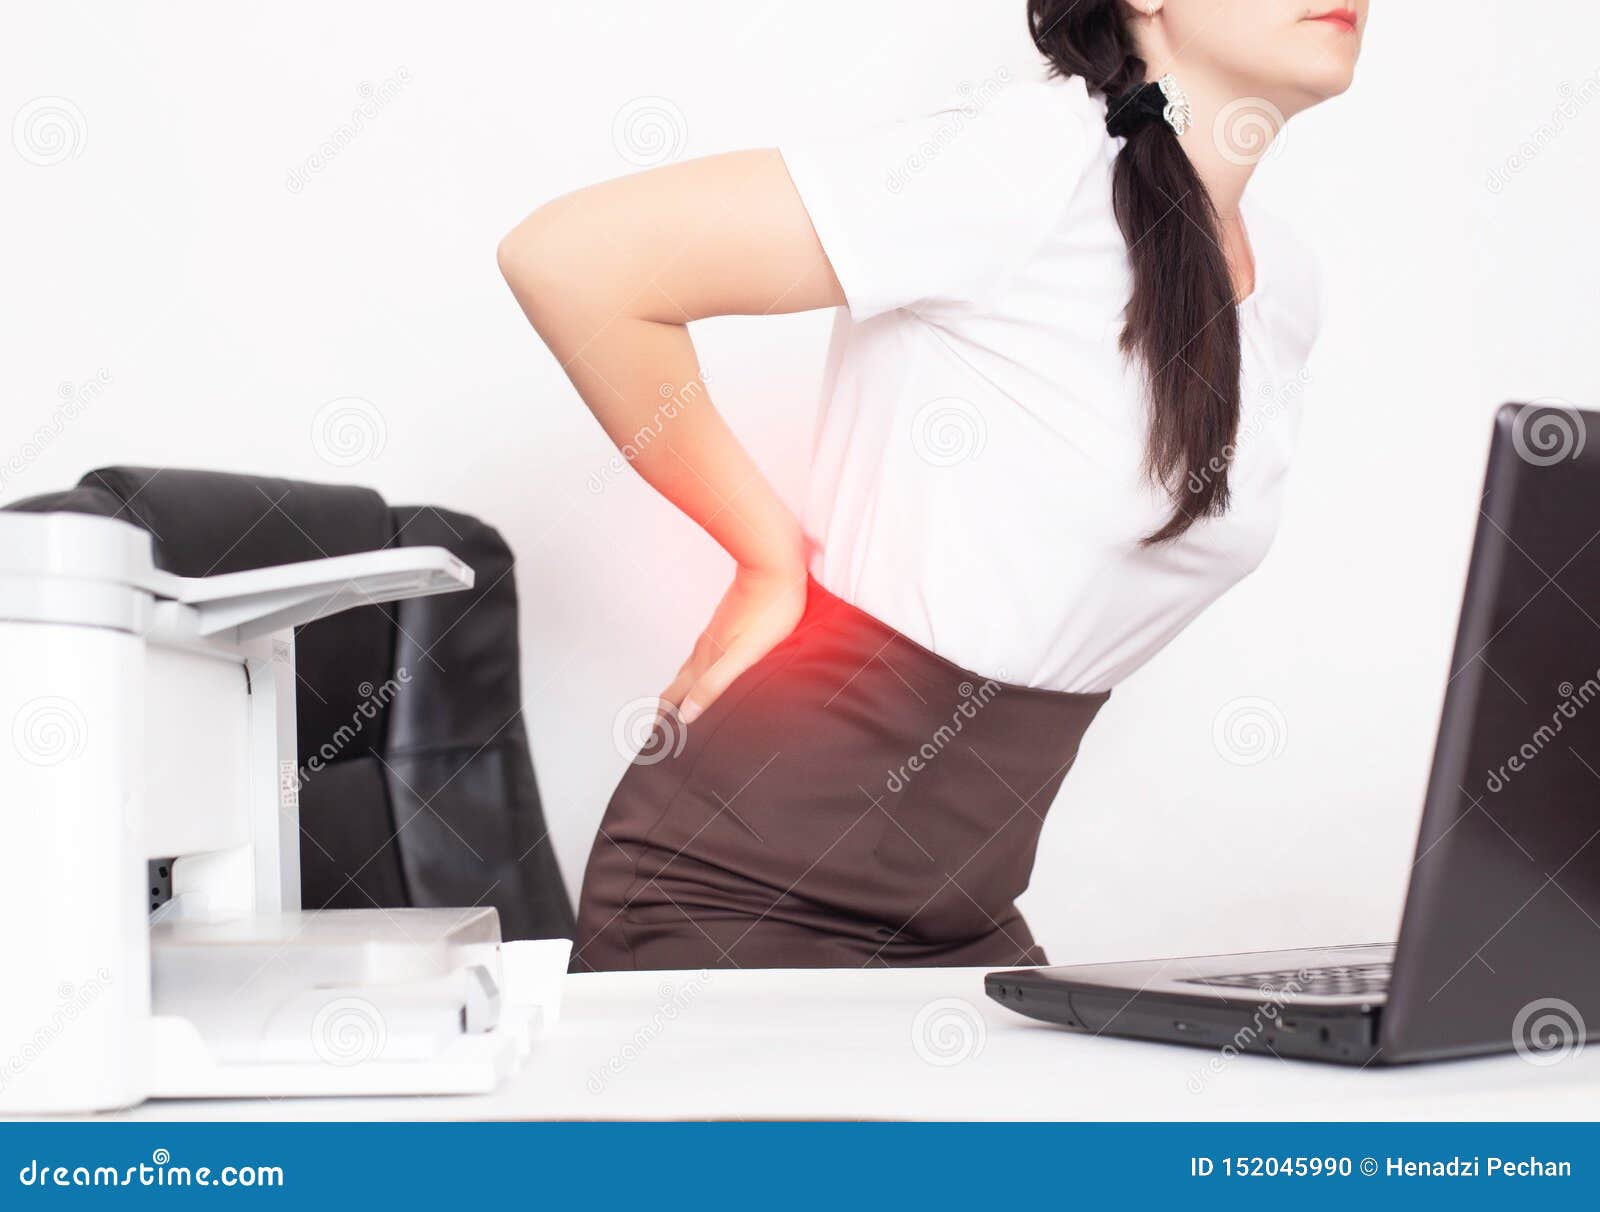 girl office worker holding her aching back from a chair, the concept of back pain in office workers, lactic acid in muscles and